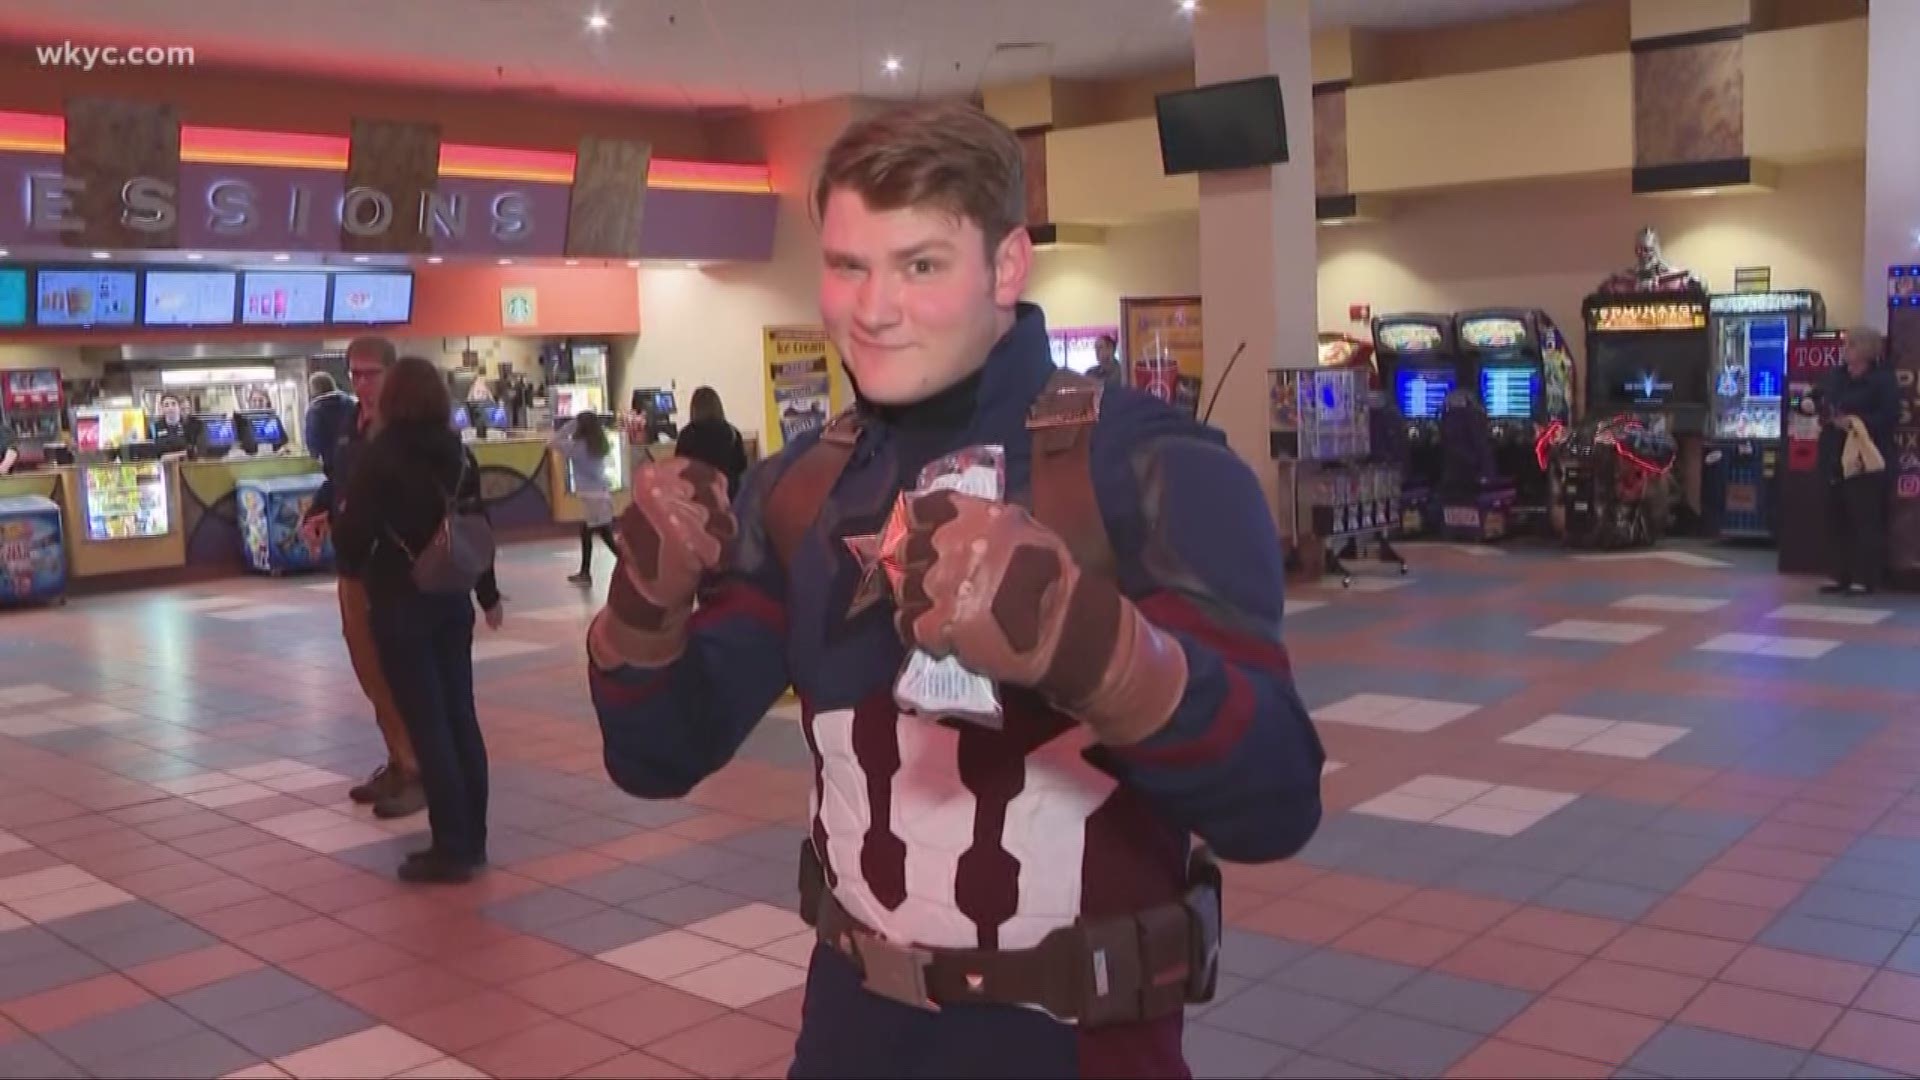 Moviegoers flock to see final installment of Avengers